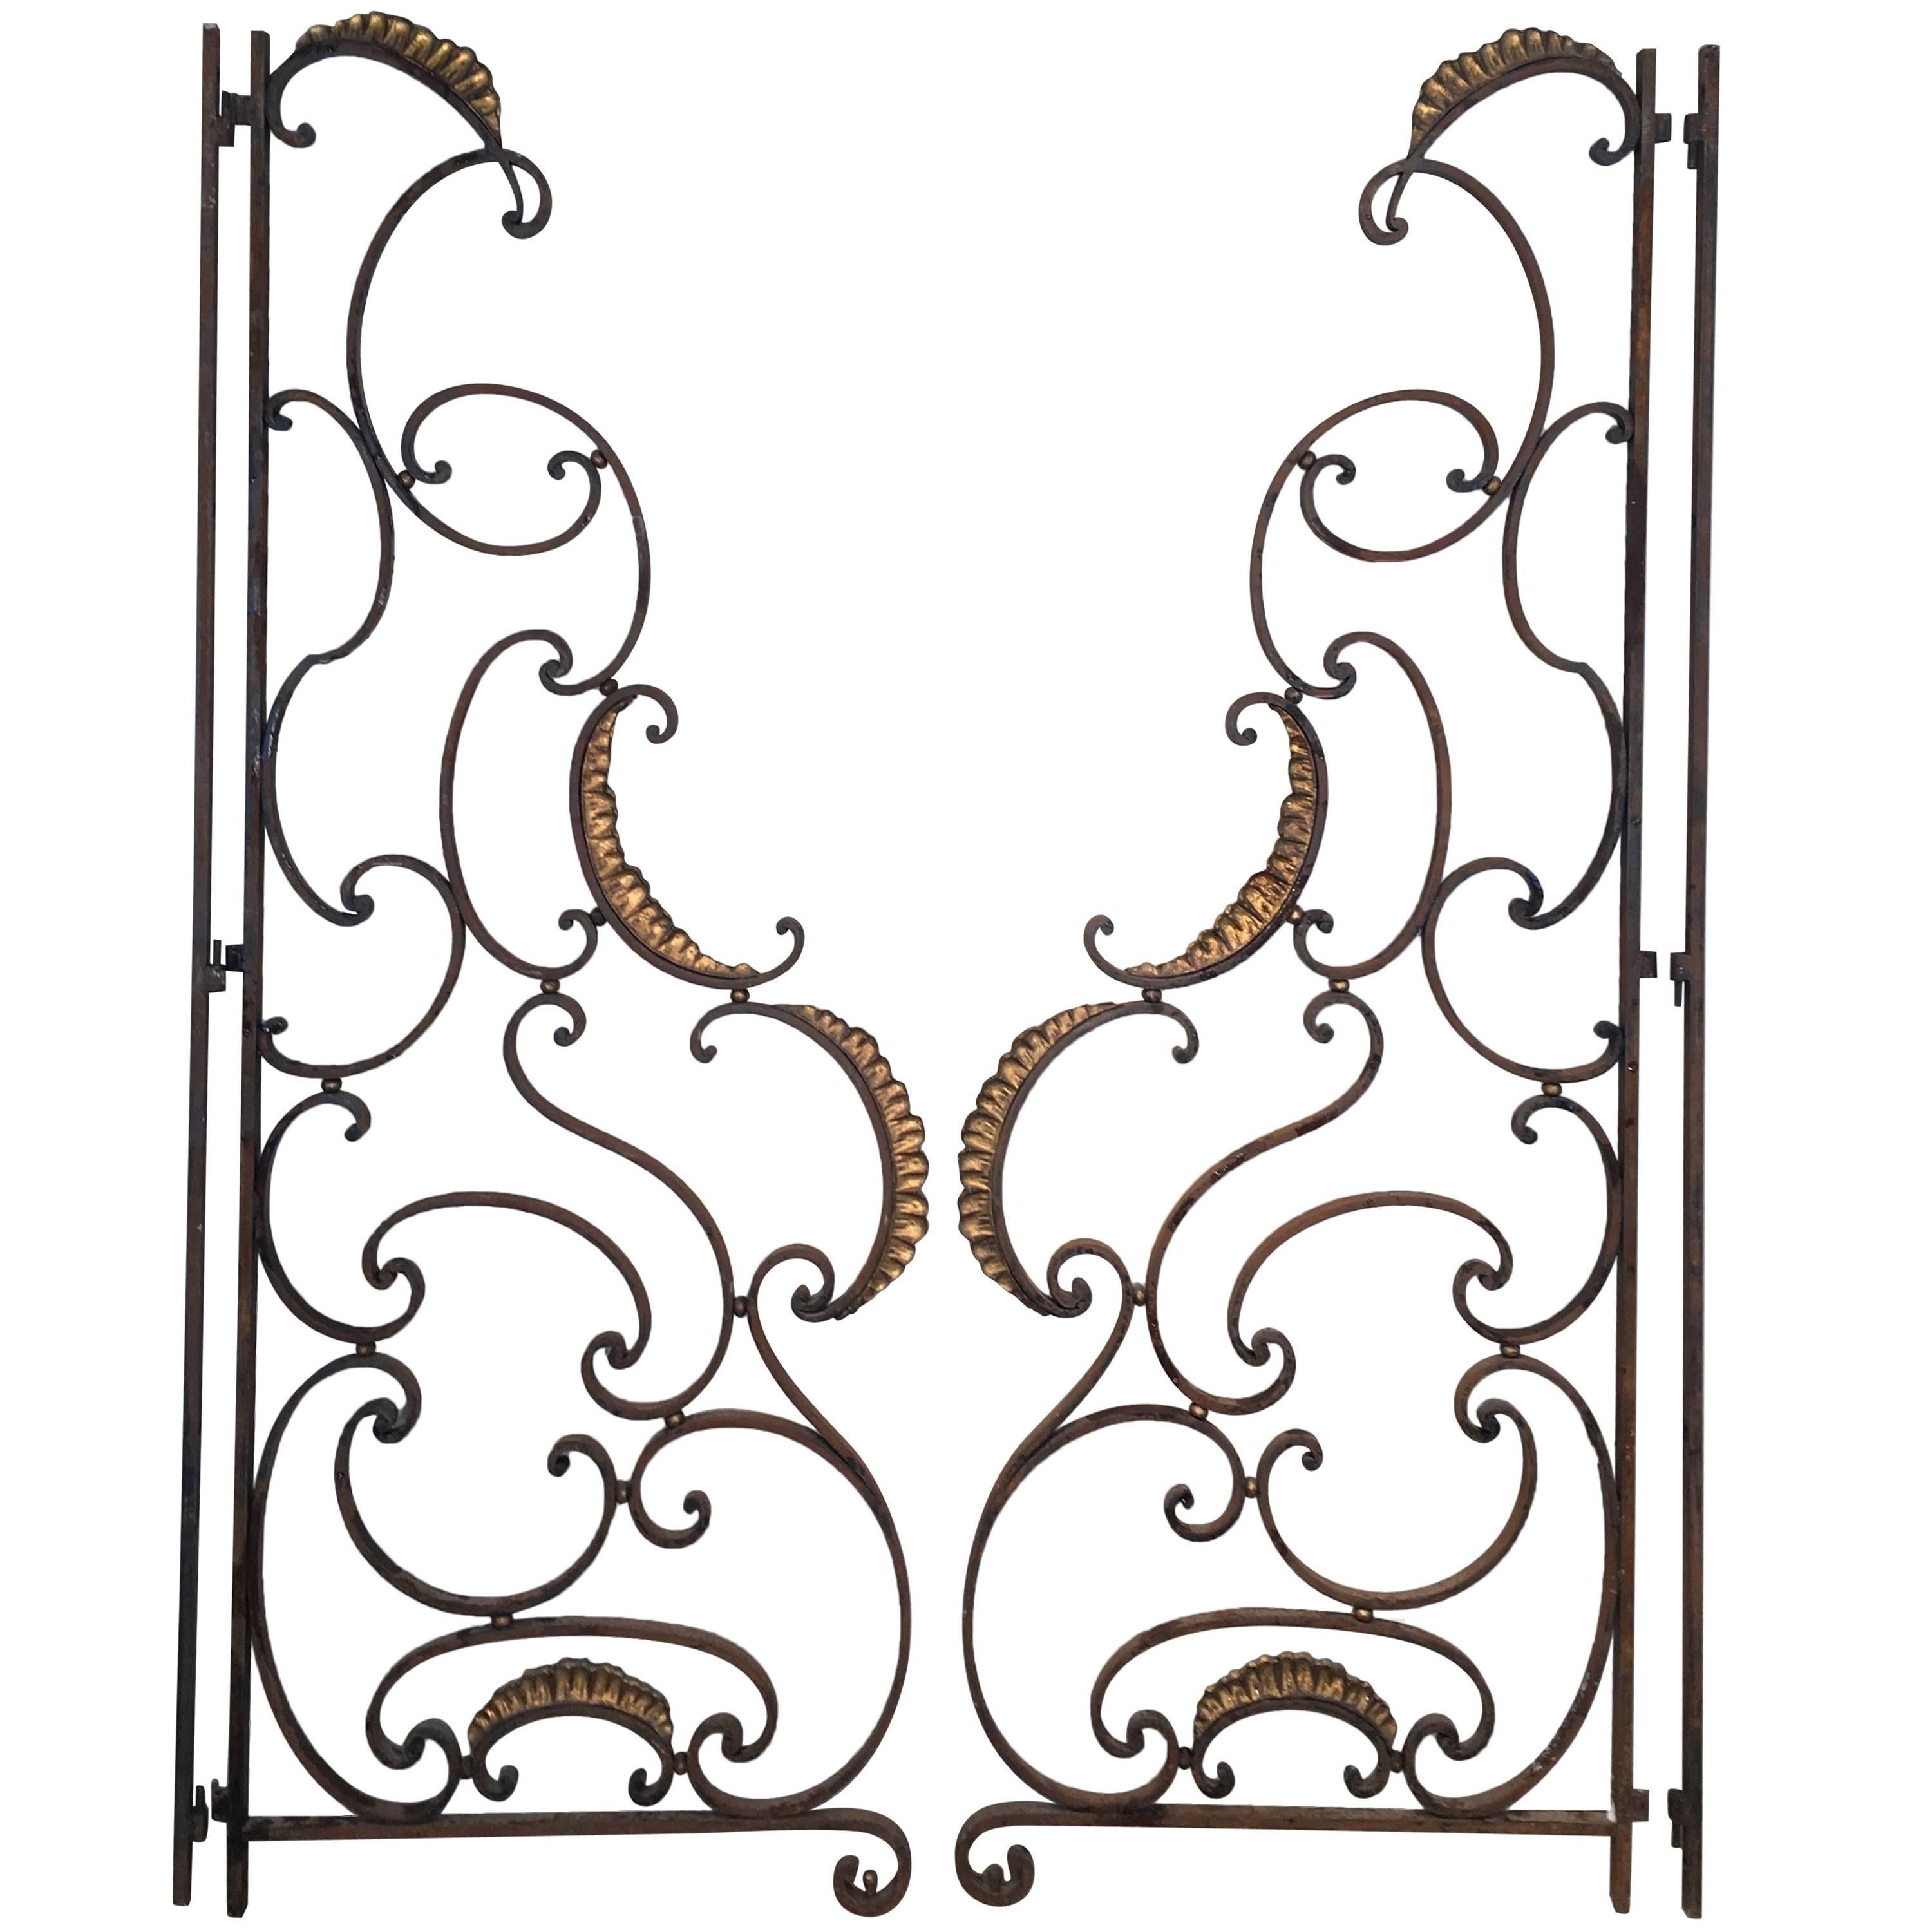 Pair of French Beaux Arts Wrought Iron Balcony Dividers or Gates